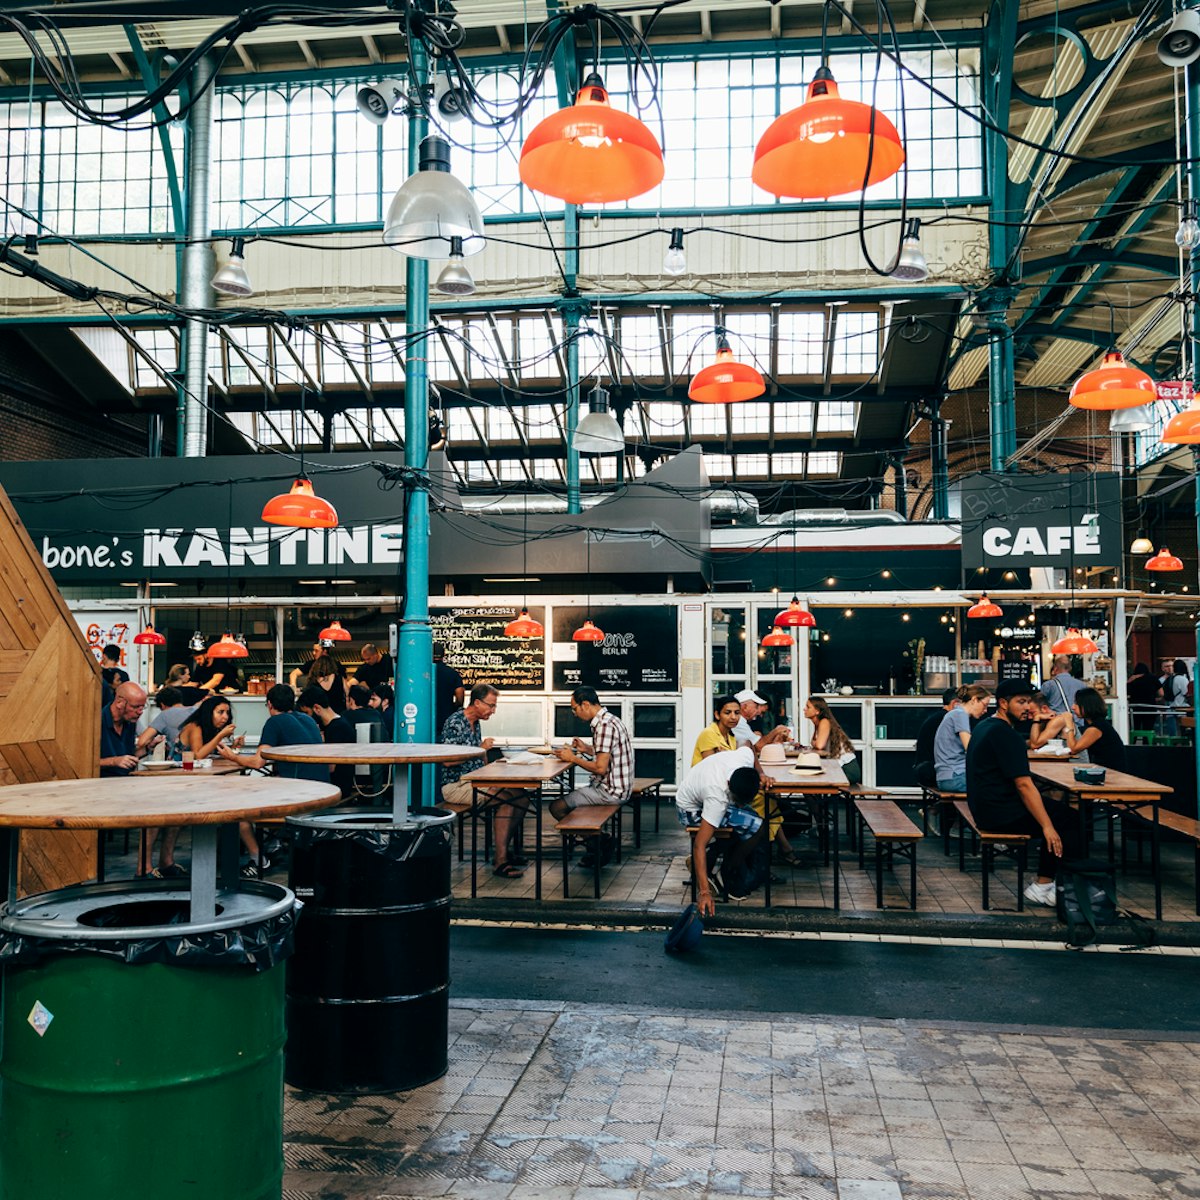 Berlin, Germany - July 29, 2019: Markthalle Neun, Market Hall Nine. It is a historical market with street food in Kreuzberg borough; Shutterstock ID 1560630479; GL: 65050; netsuite: Online ed; full: Berlin POIs; name: Claire Naylor
1560630479